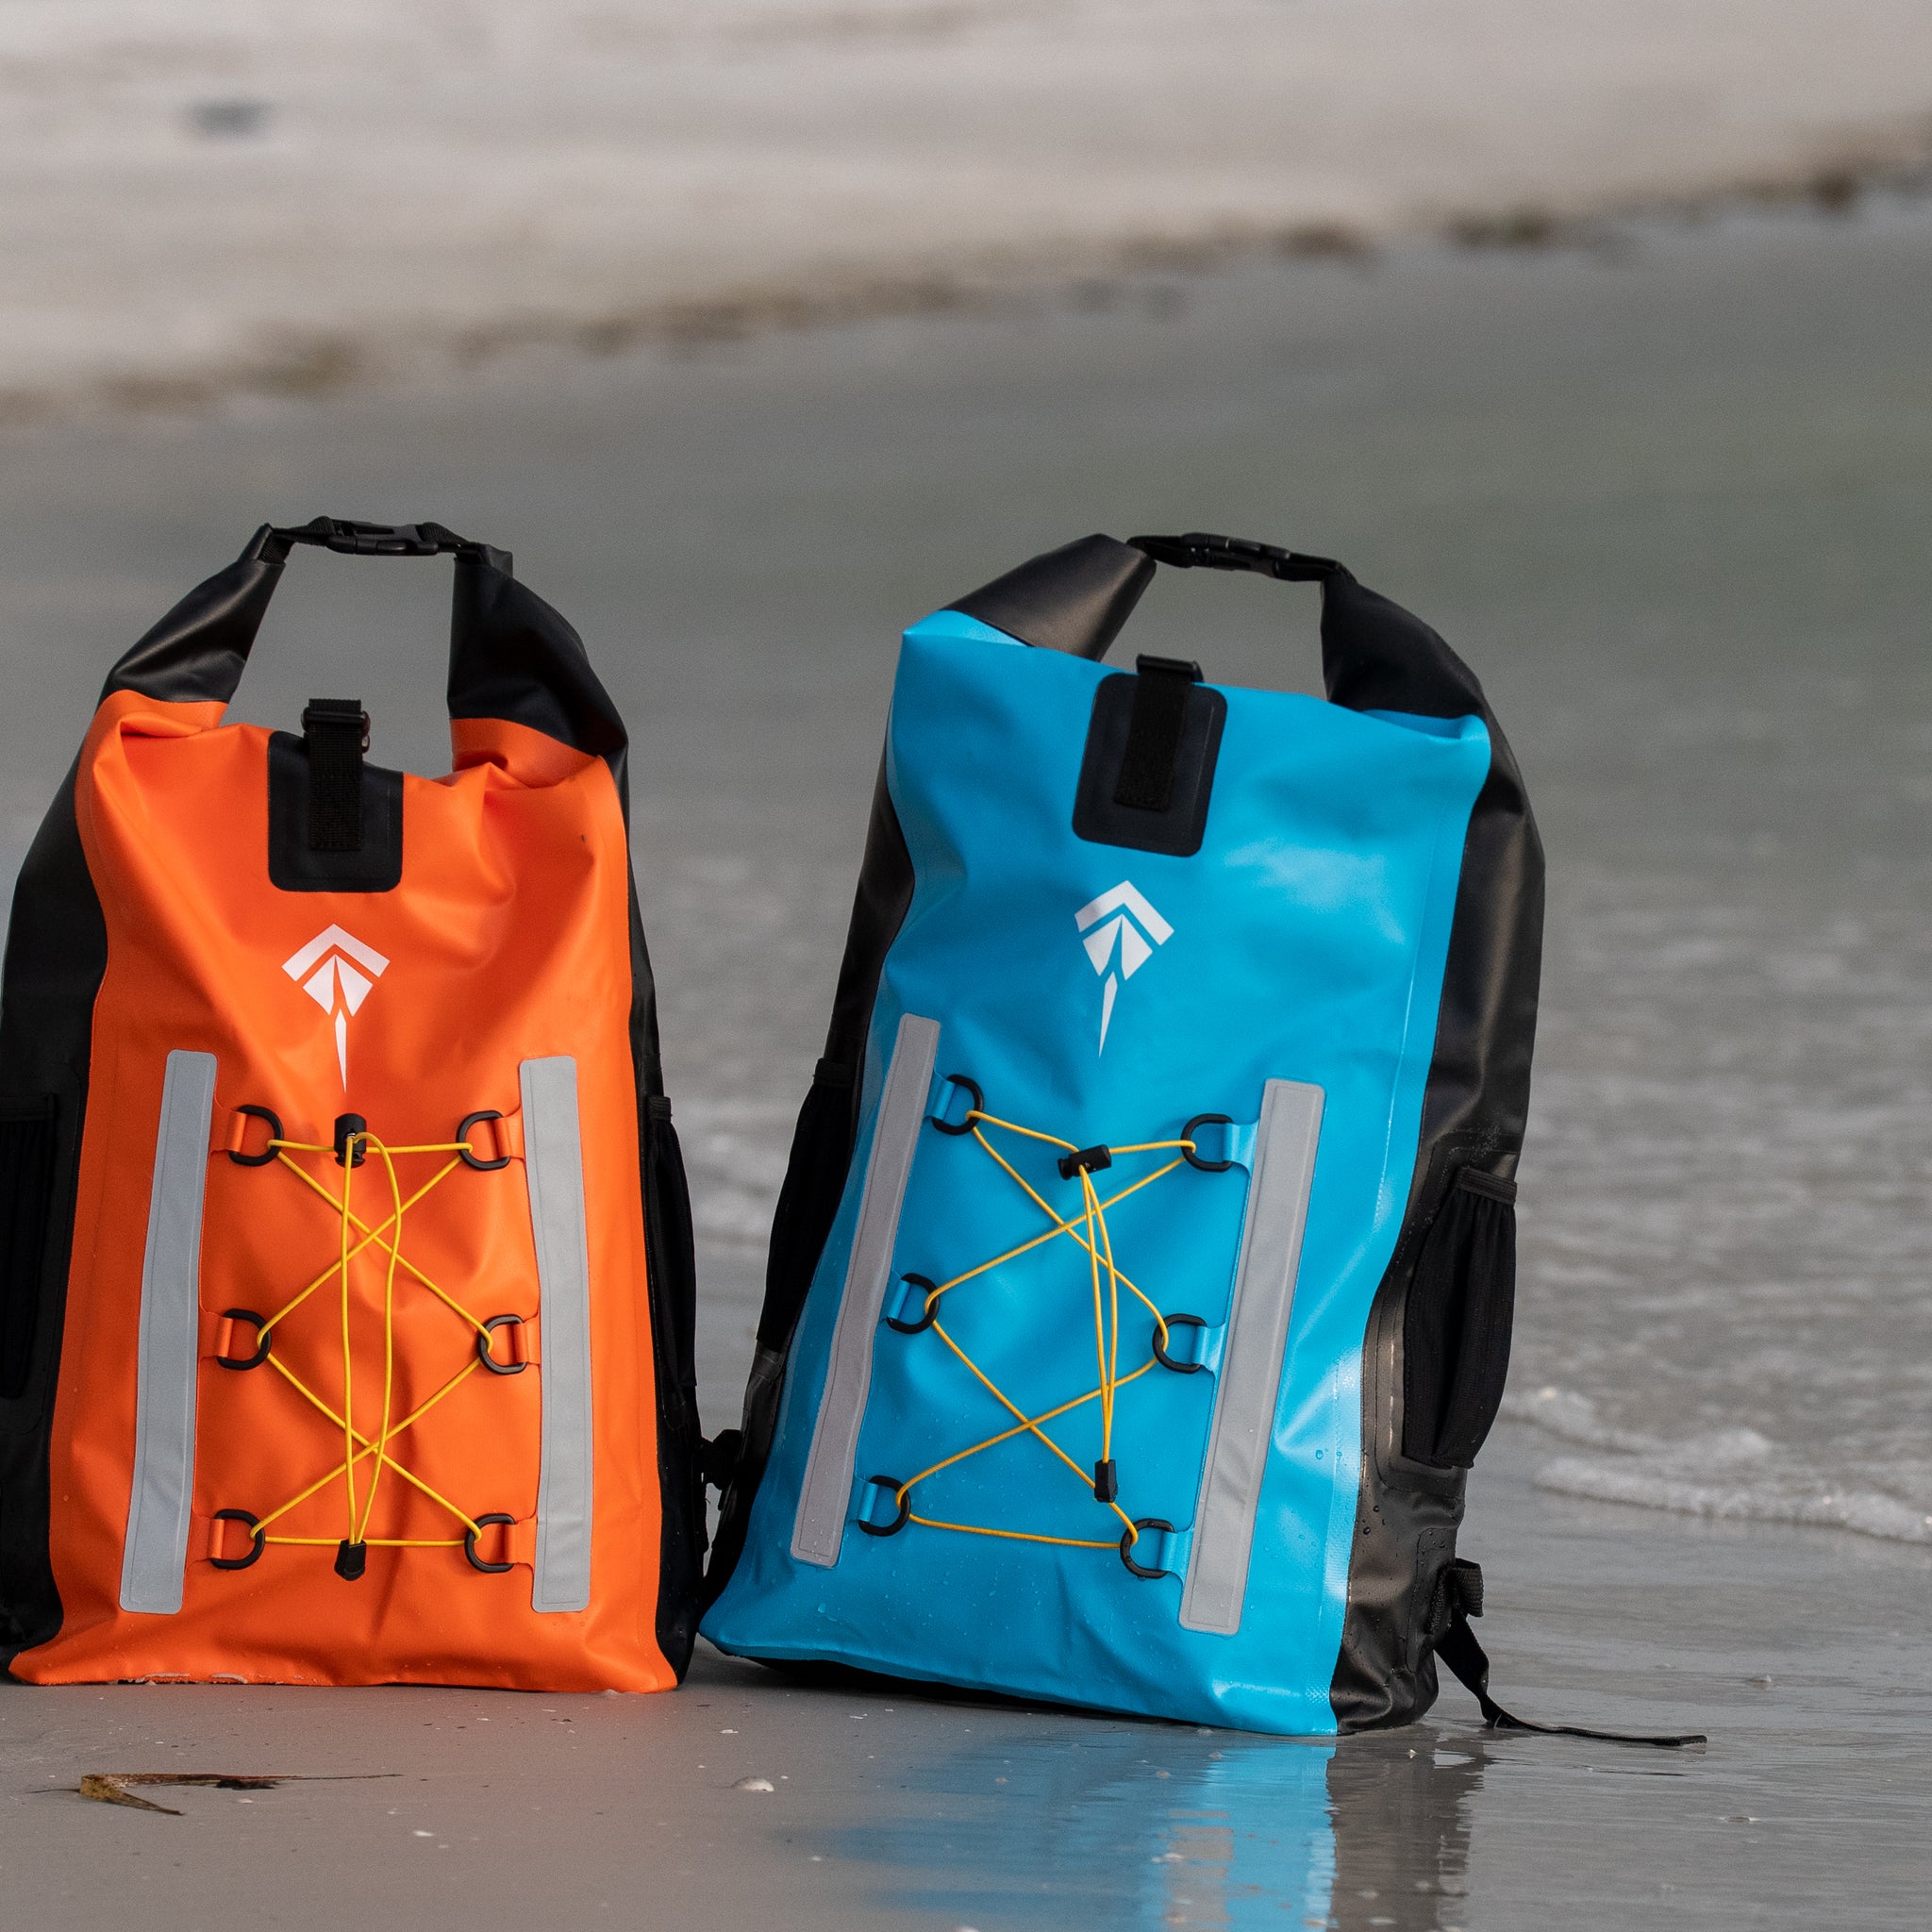 Ready for anything: Rain or Shine, with Our Waterproof Bags